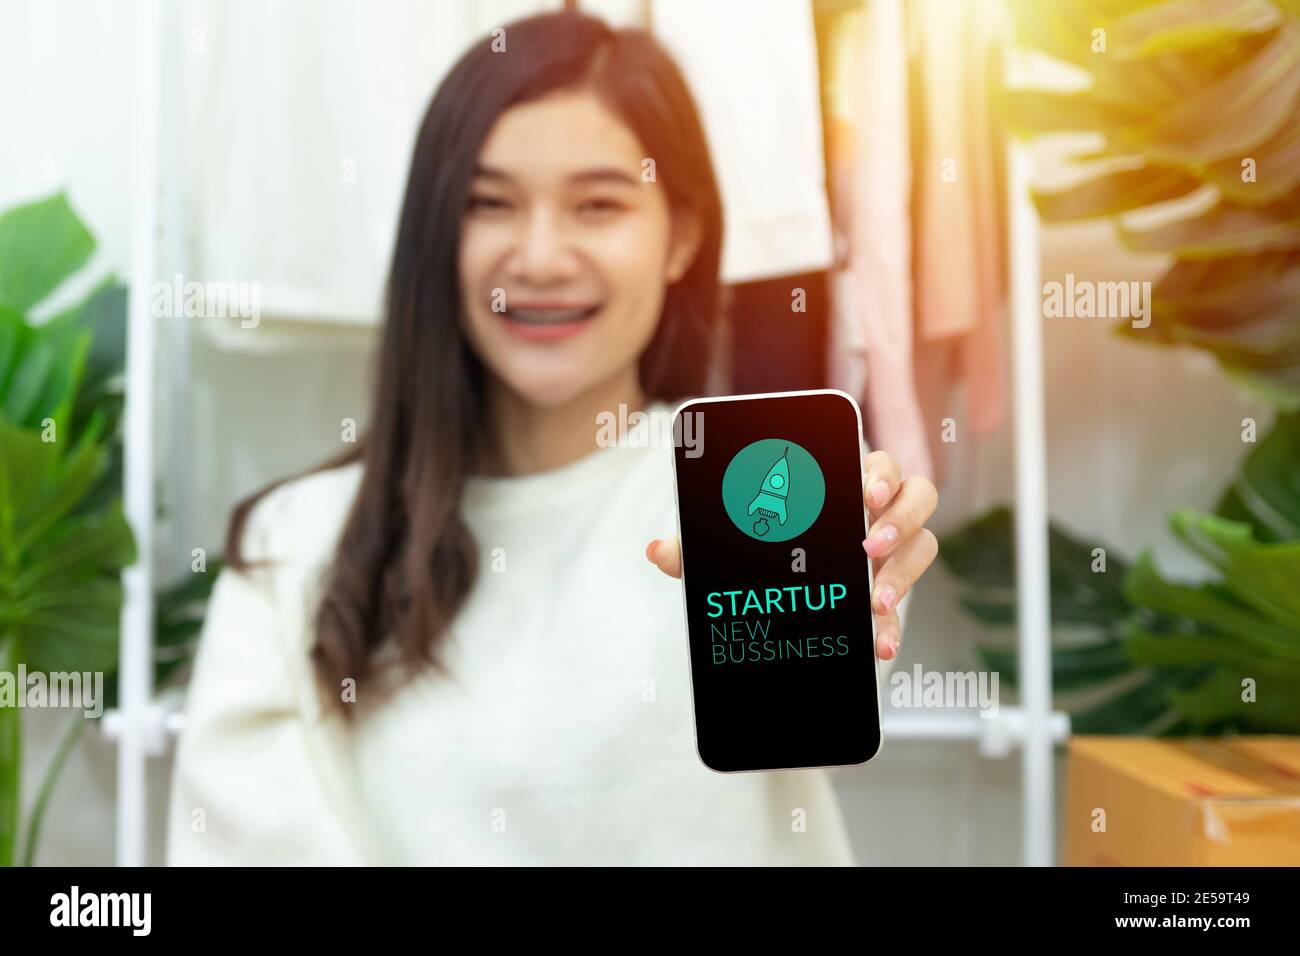 young happy confident small business owner Asian woman showing smartphone with screen display for startup new business with rocket launch icon. Stock Photo